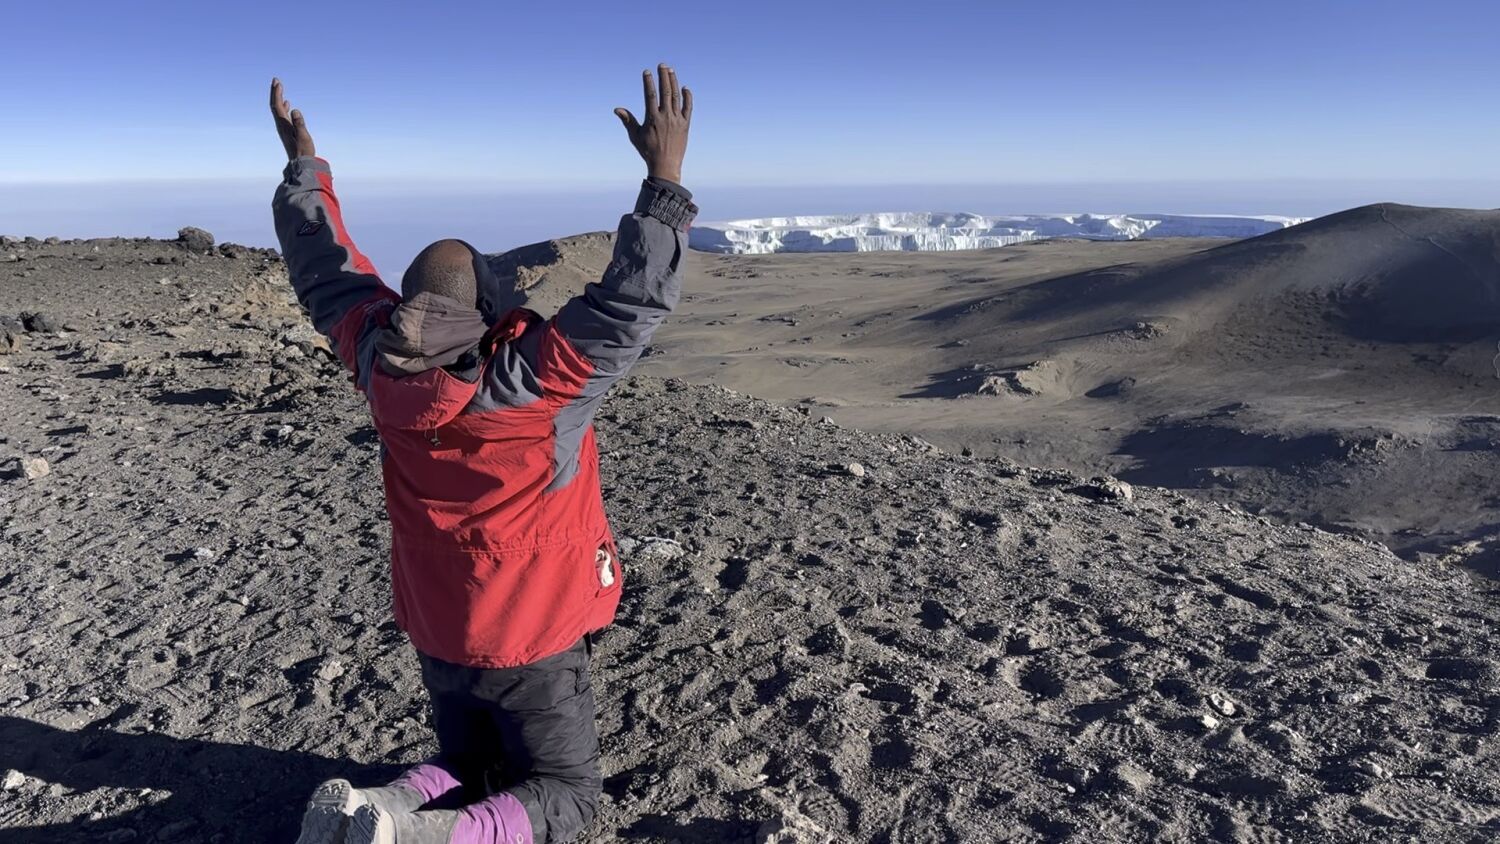 A climb up Mt. Kilimanjaro before the storied snows turn to dust